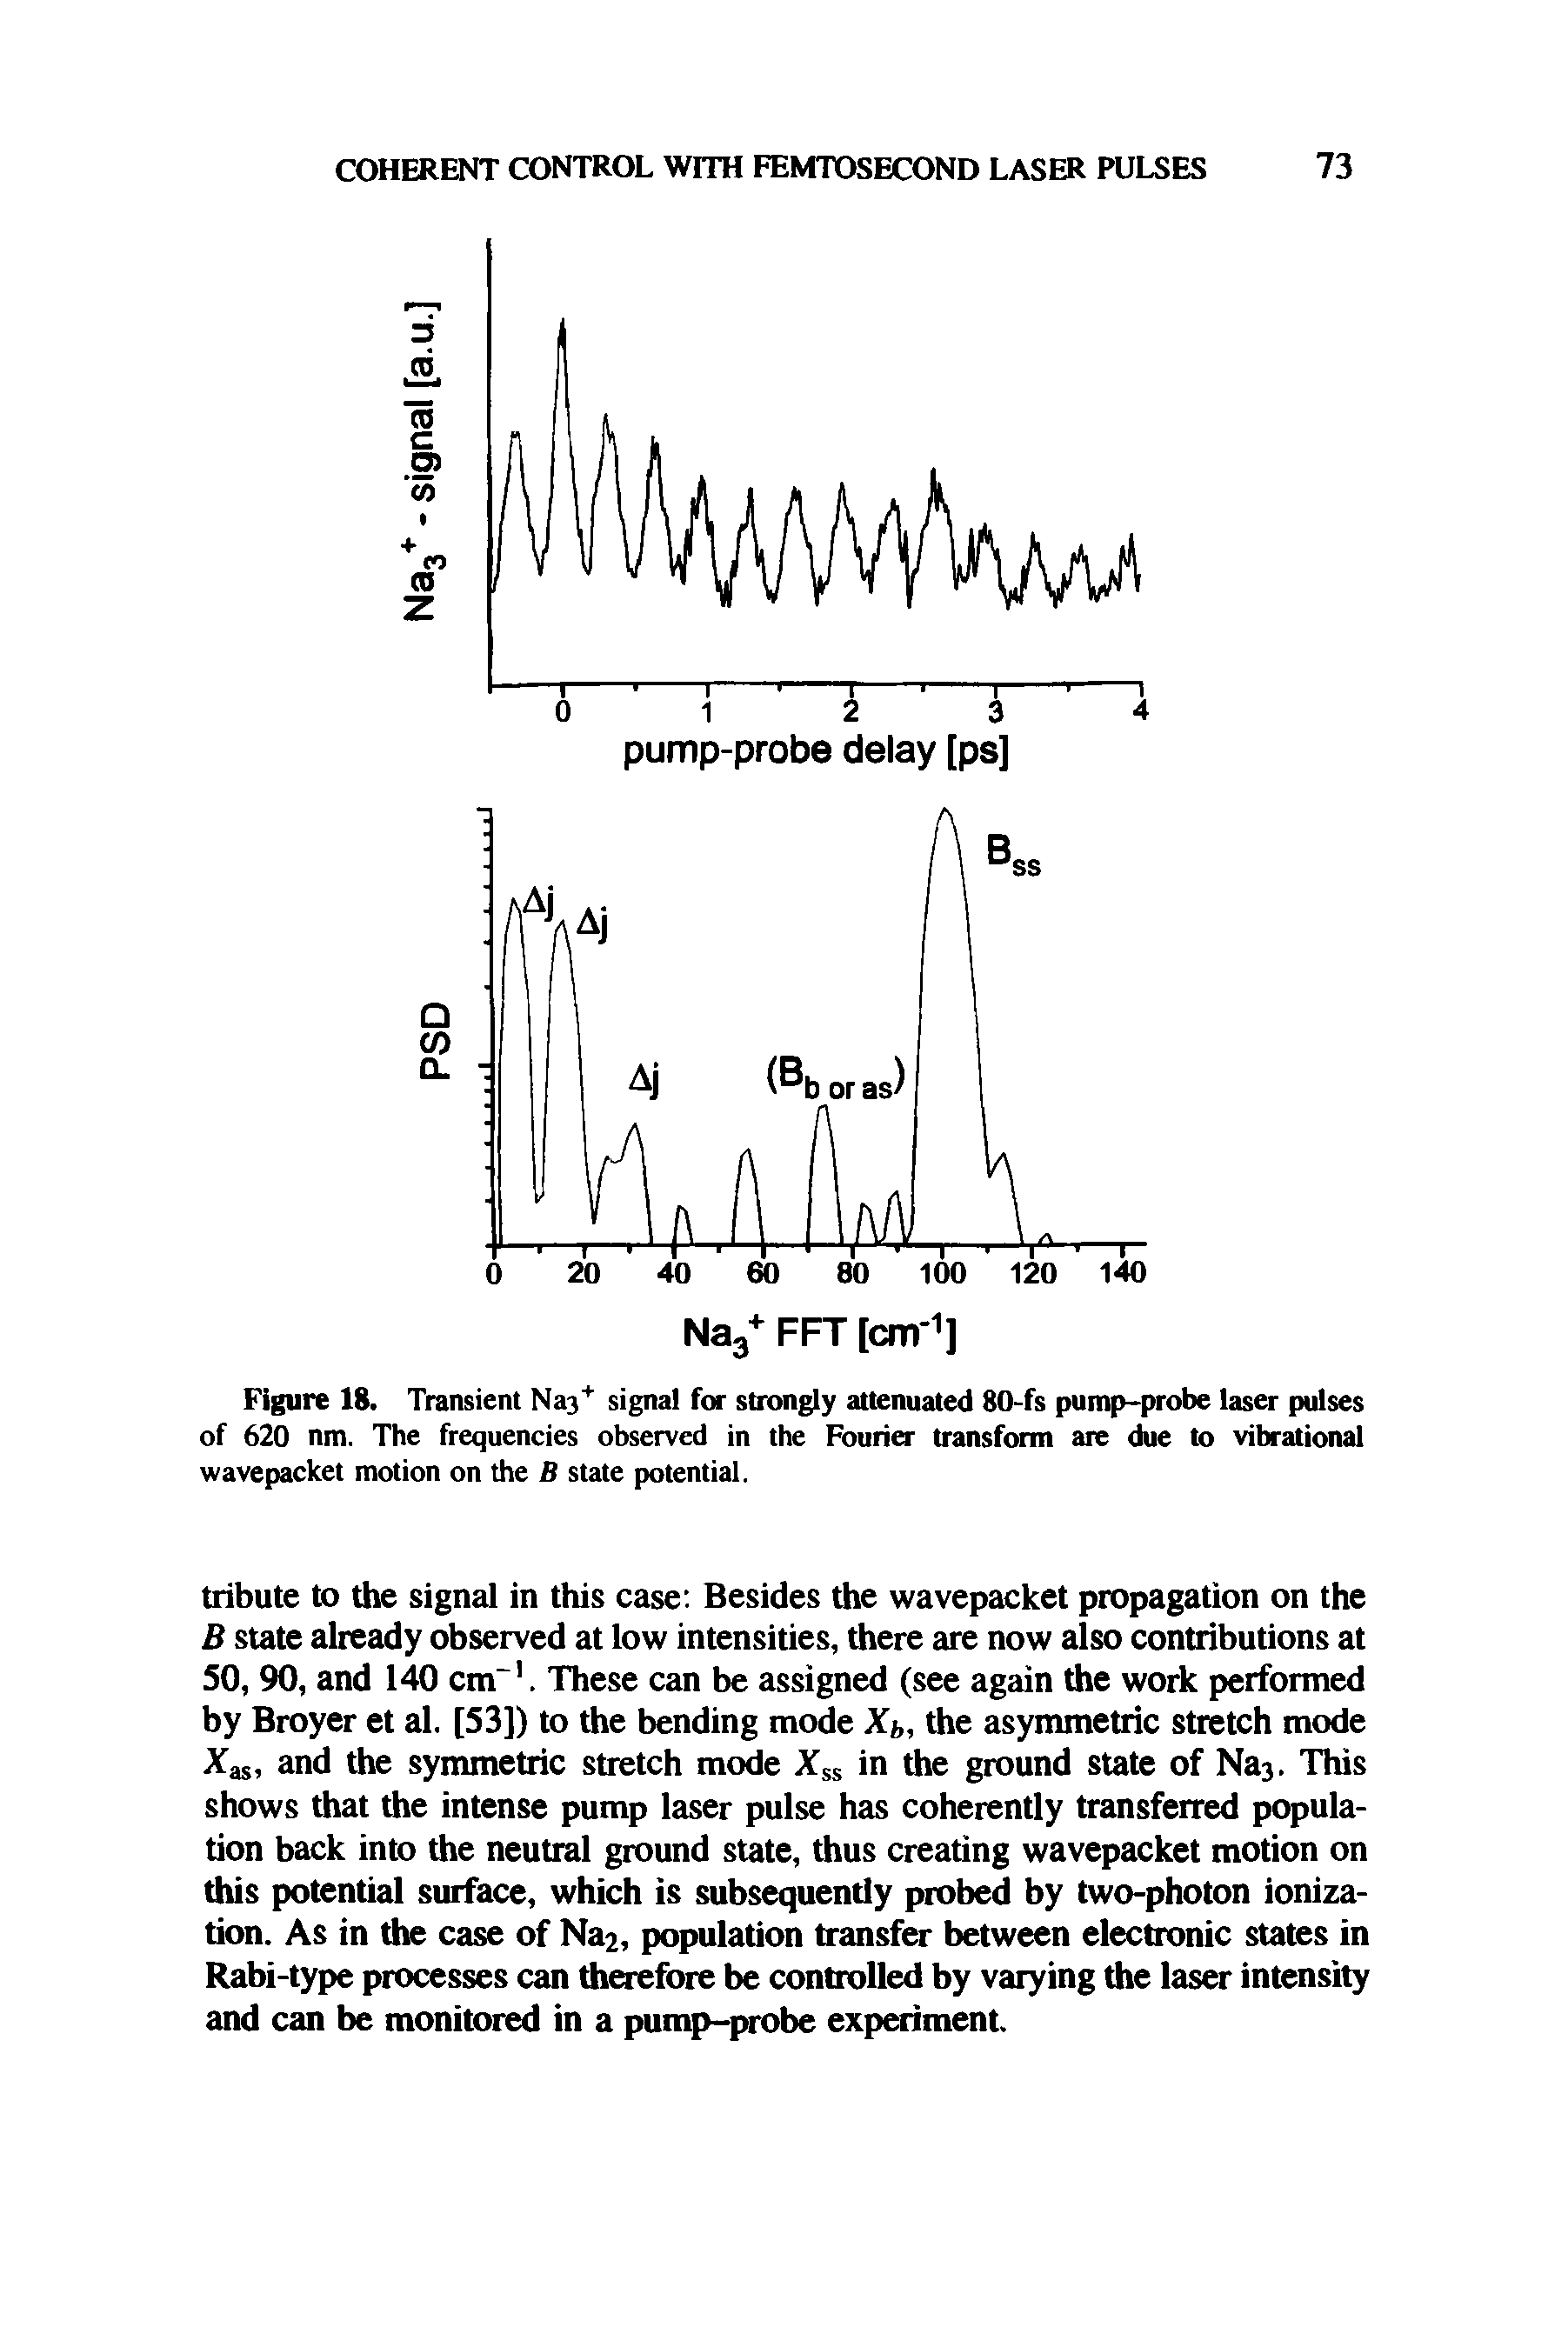 Figure 18. Transient Na3+ signal for strongly attenuated 80-fs pump-probe laser pulses of 620 nm. The frequencies observed in the Fourier transform are due to vibrational wavepacket motion on the B state potential.